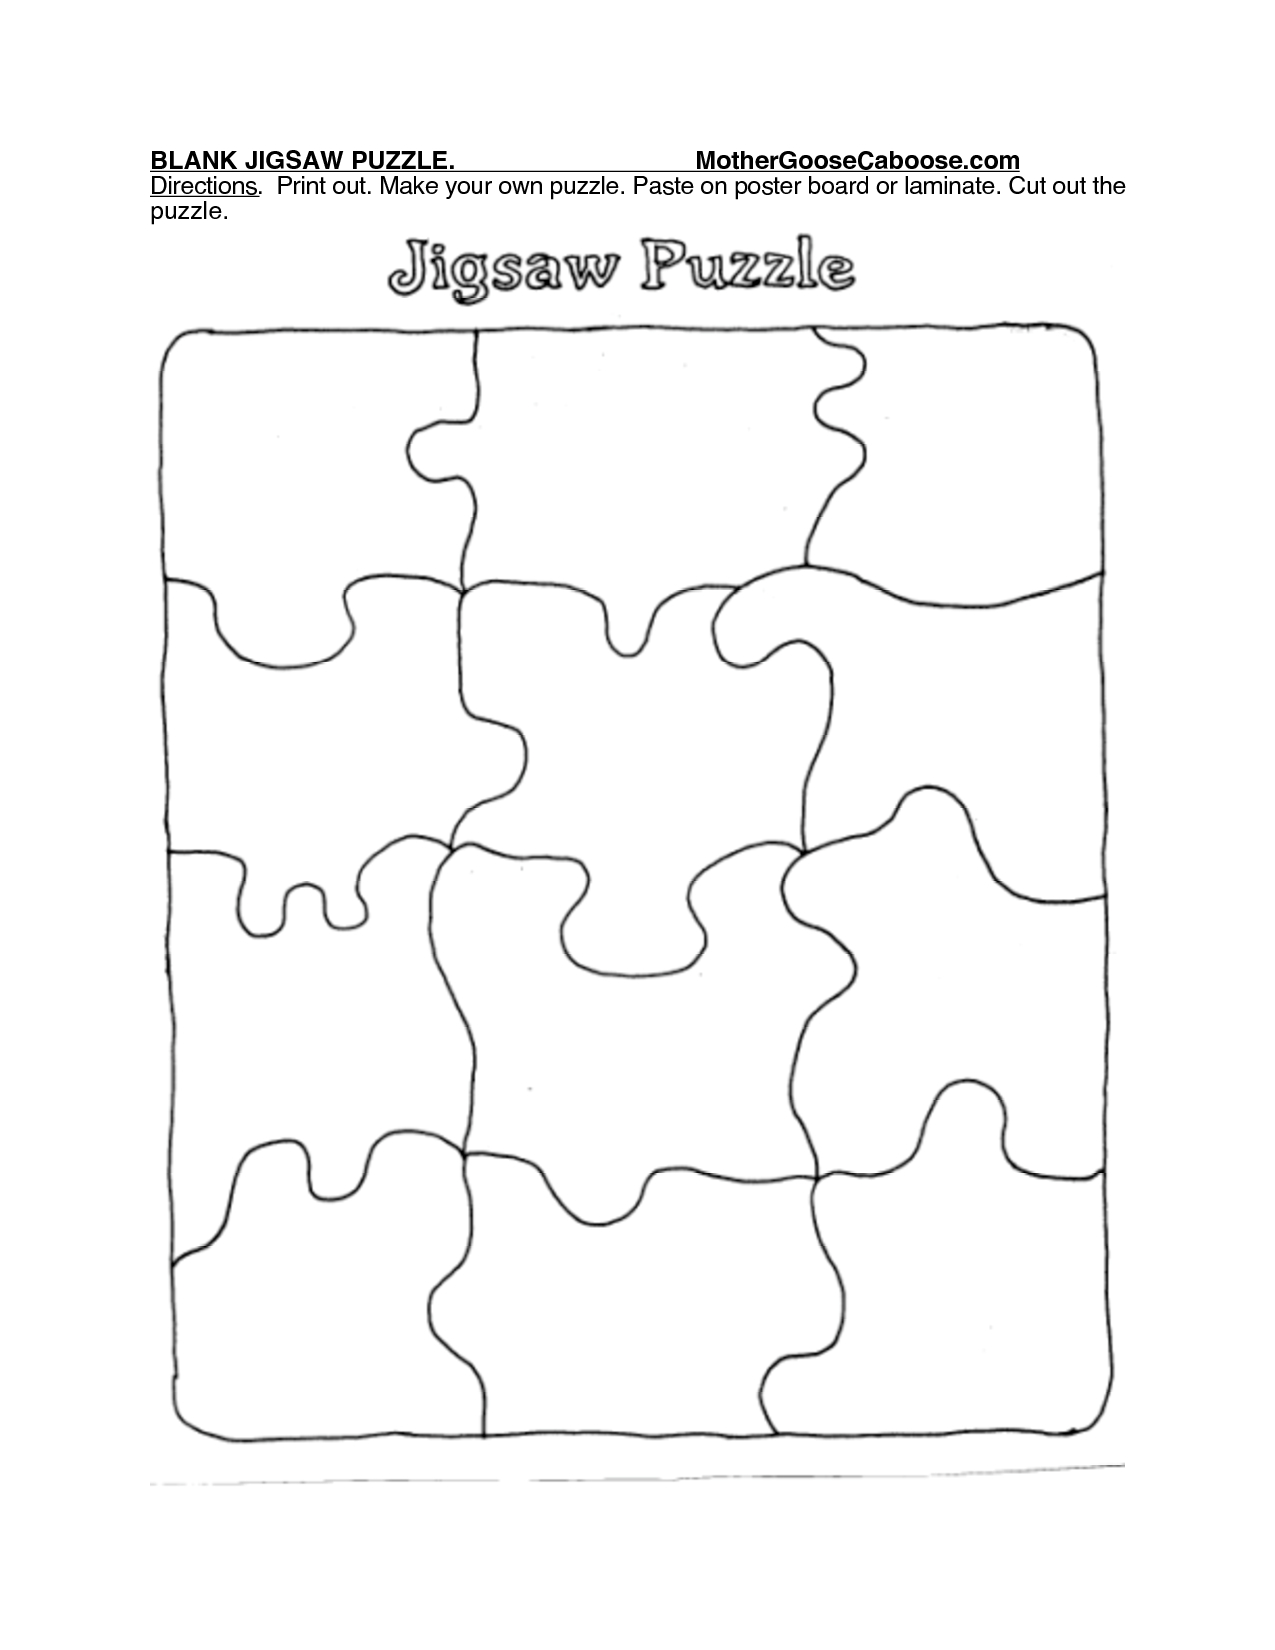 Printable Puzzle Piece Template | Search Results | New Calendar - Printable Jigsaw Puzzle Template Generator